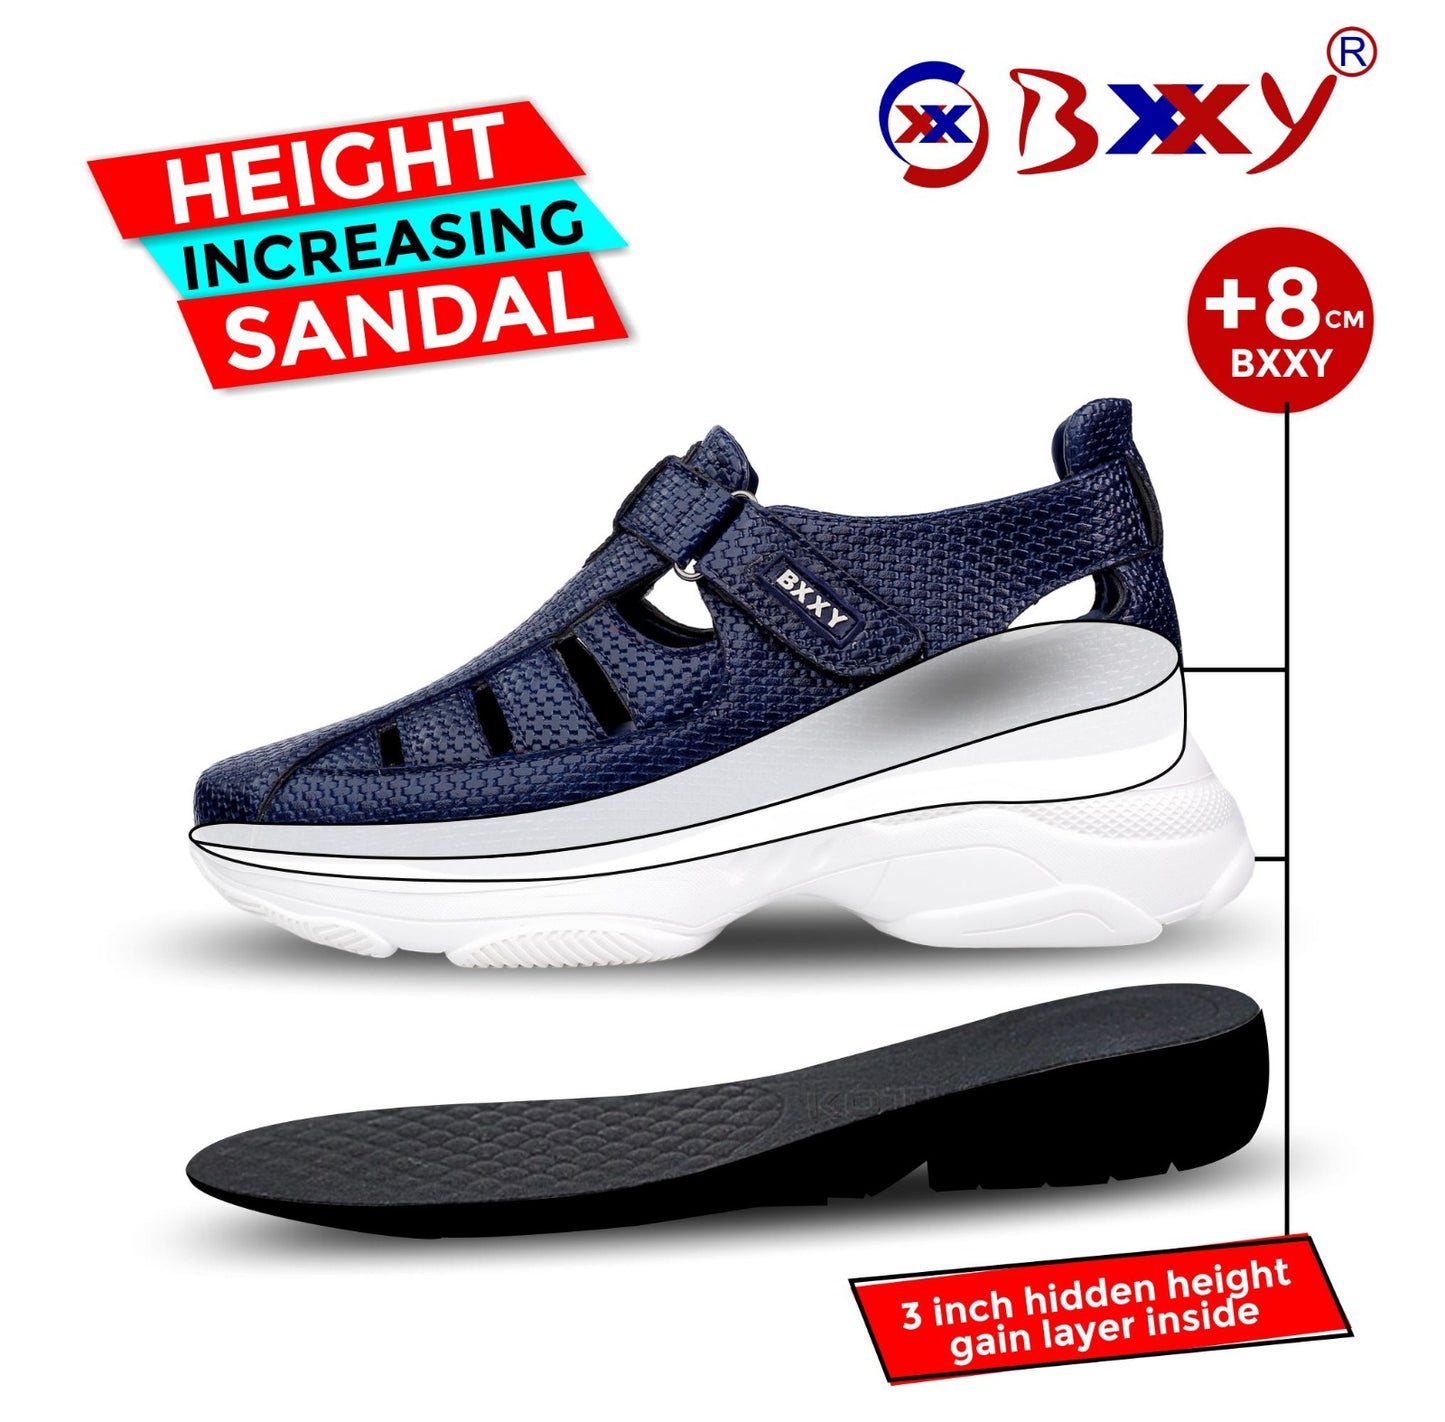 Bxxy's 3 Inch Hidden Height Increasing High-end Fashionable Sandals for Men